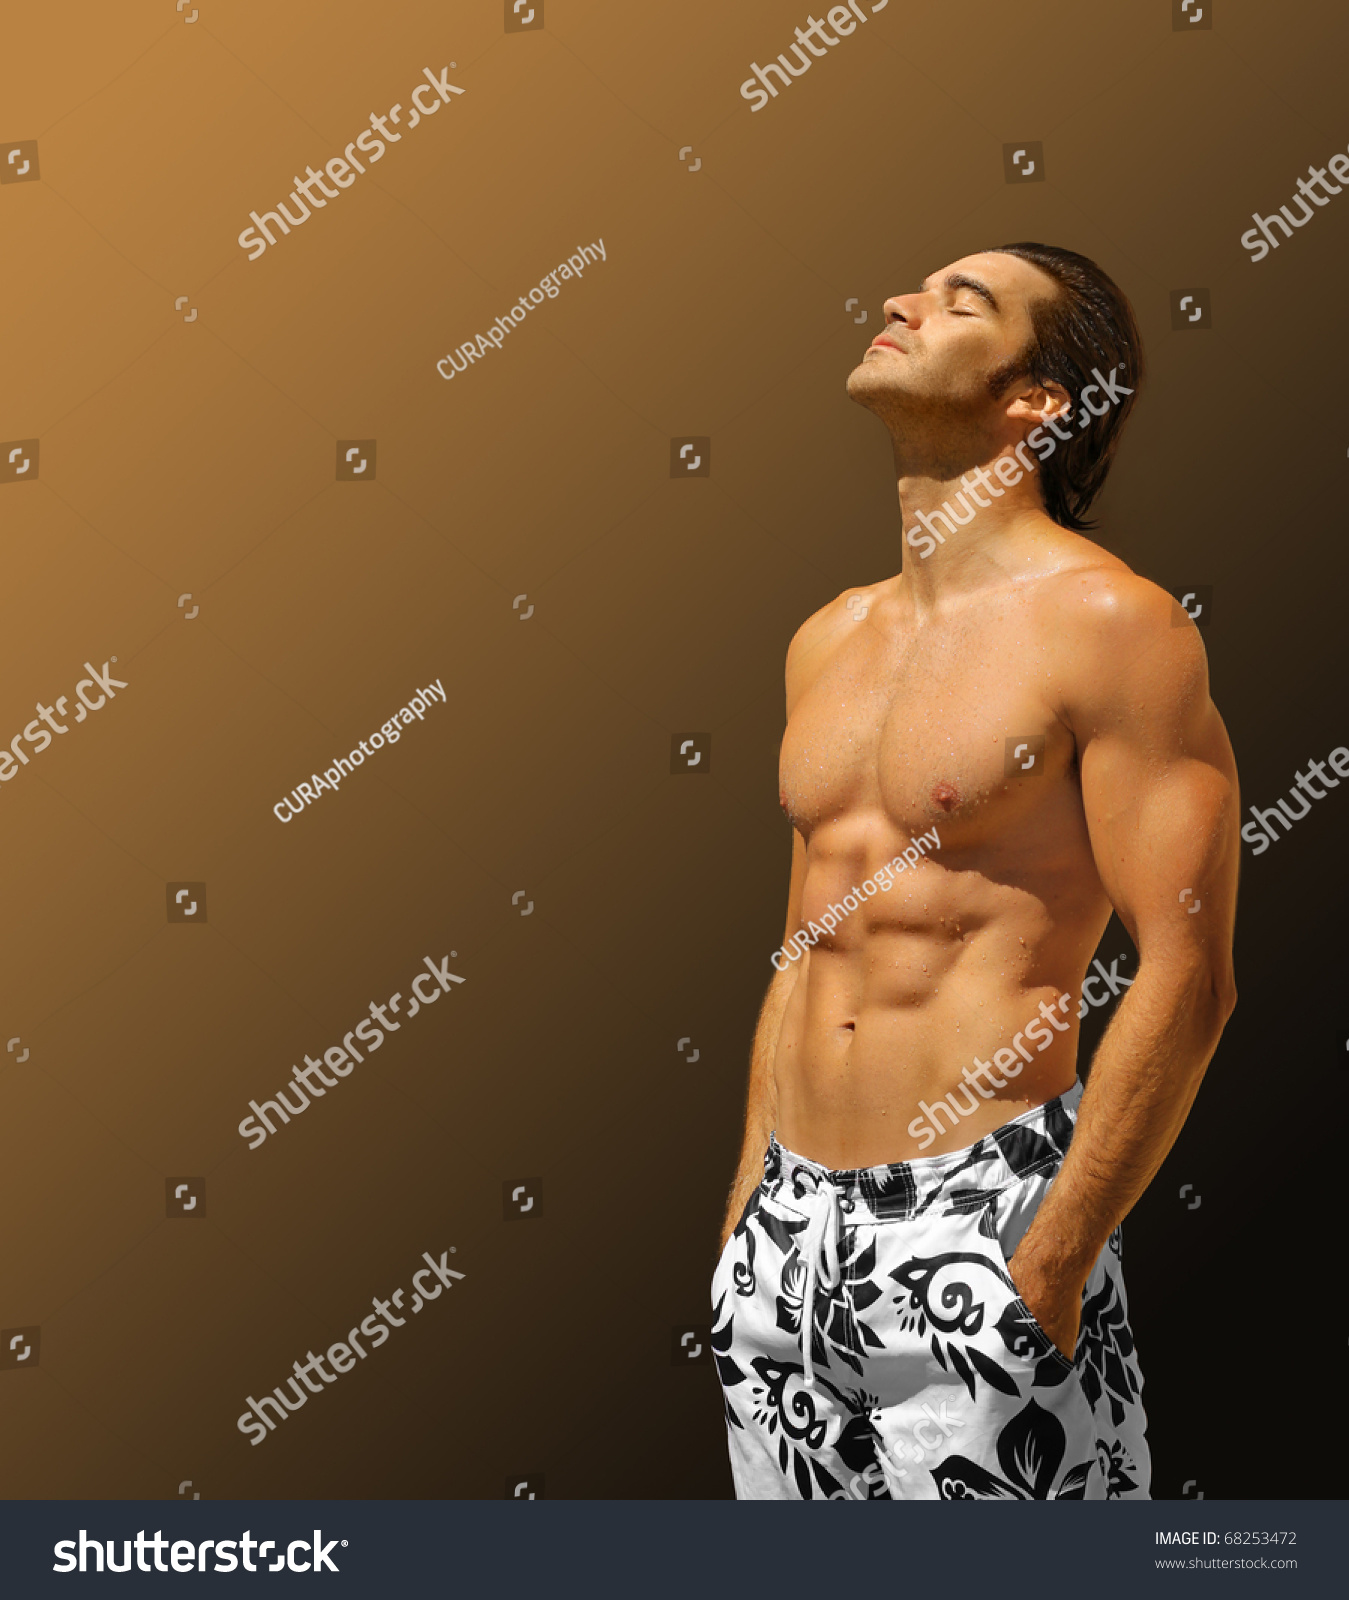 Handsome Male Fitness Model Shirtless With Hands In Pockets Looking Up With Lots Of Copy Space